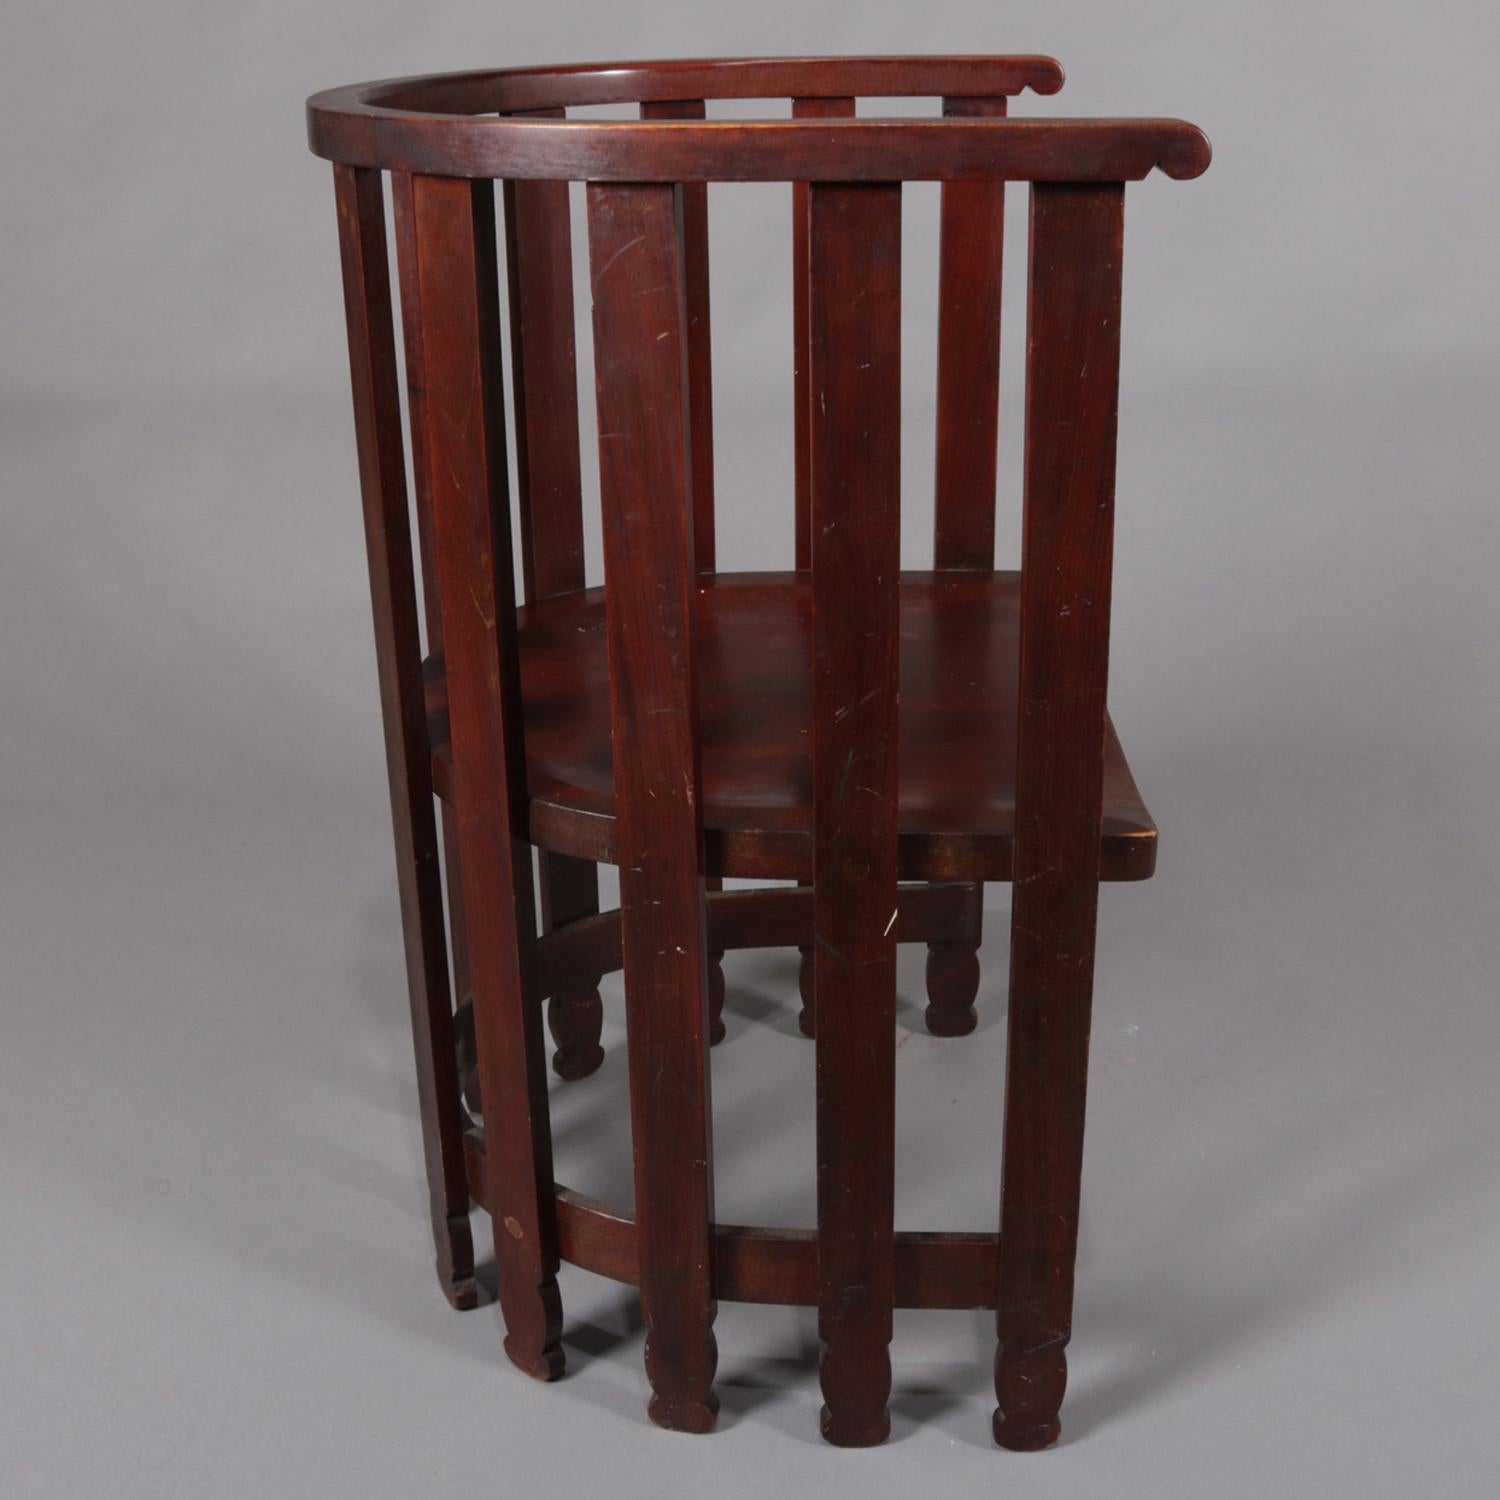 Arts and Crafts Arts & Crafts Prairie Frank Lloyd Wright School Mahogany Spindle Chair